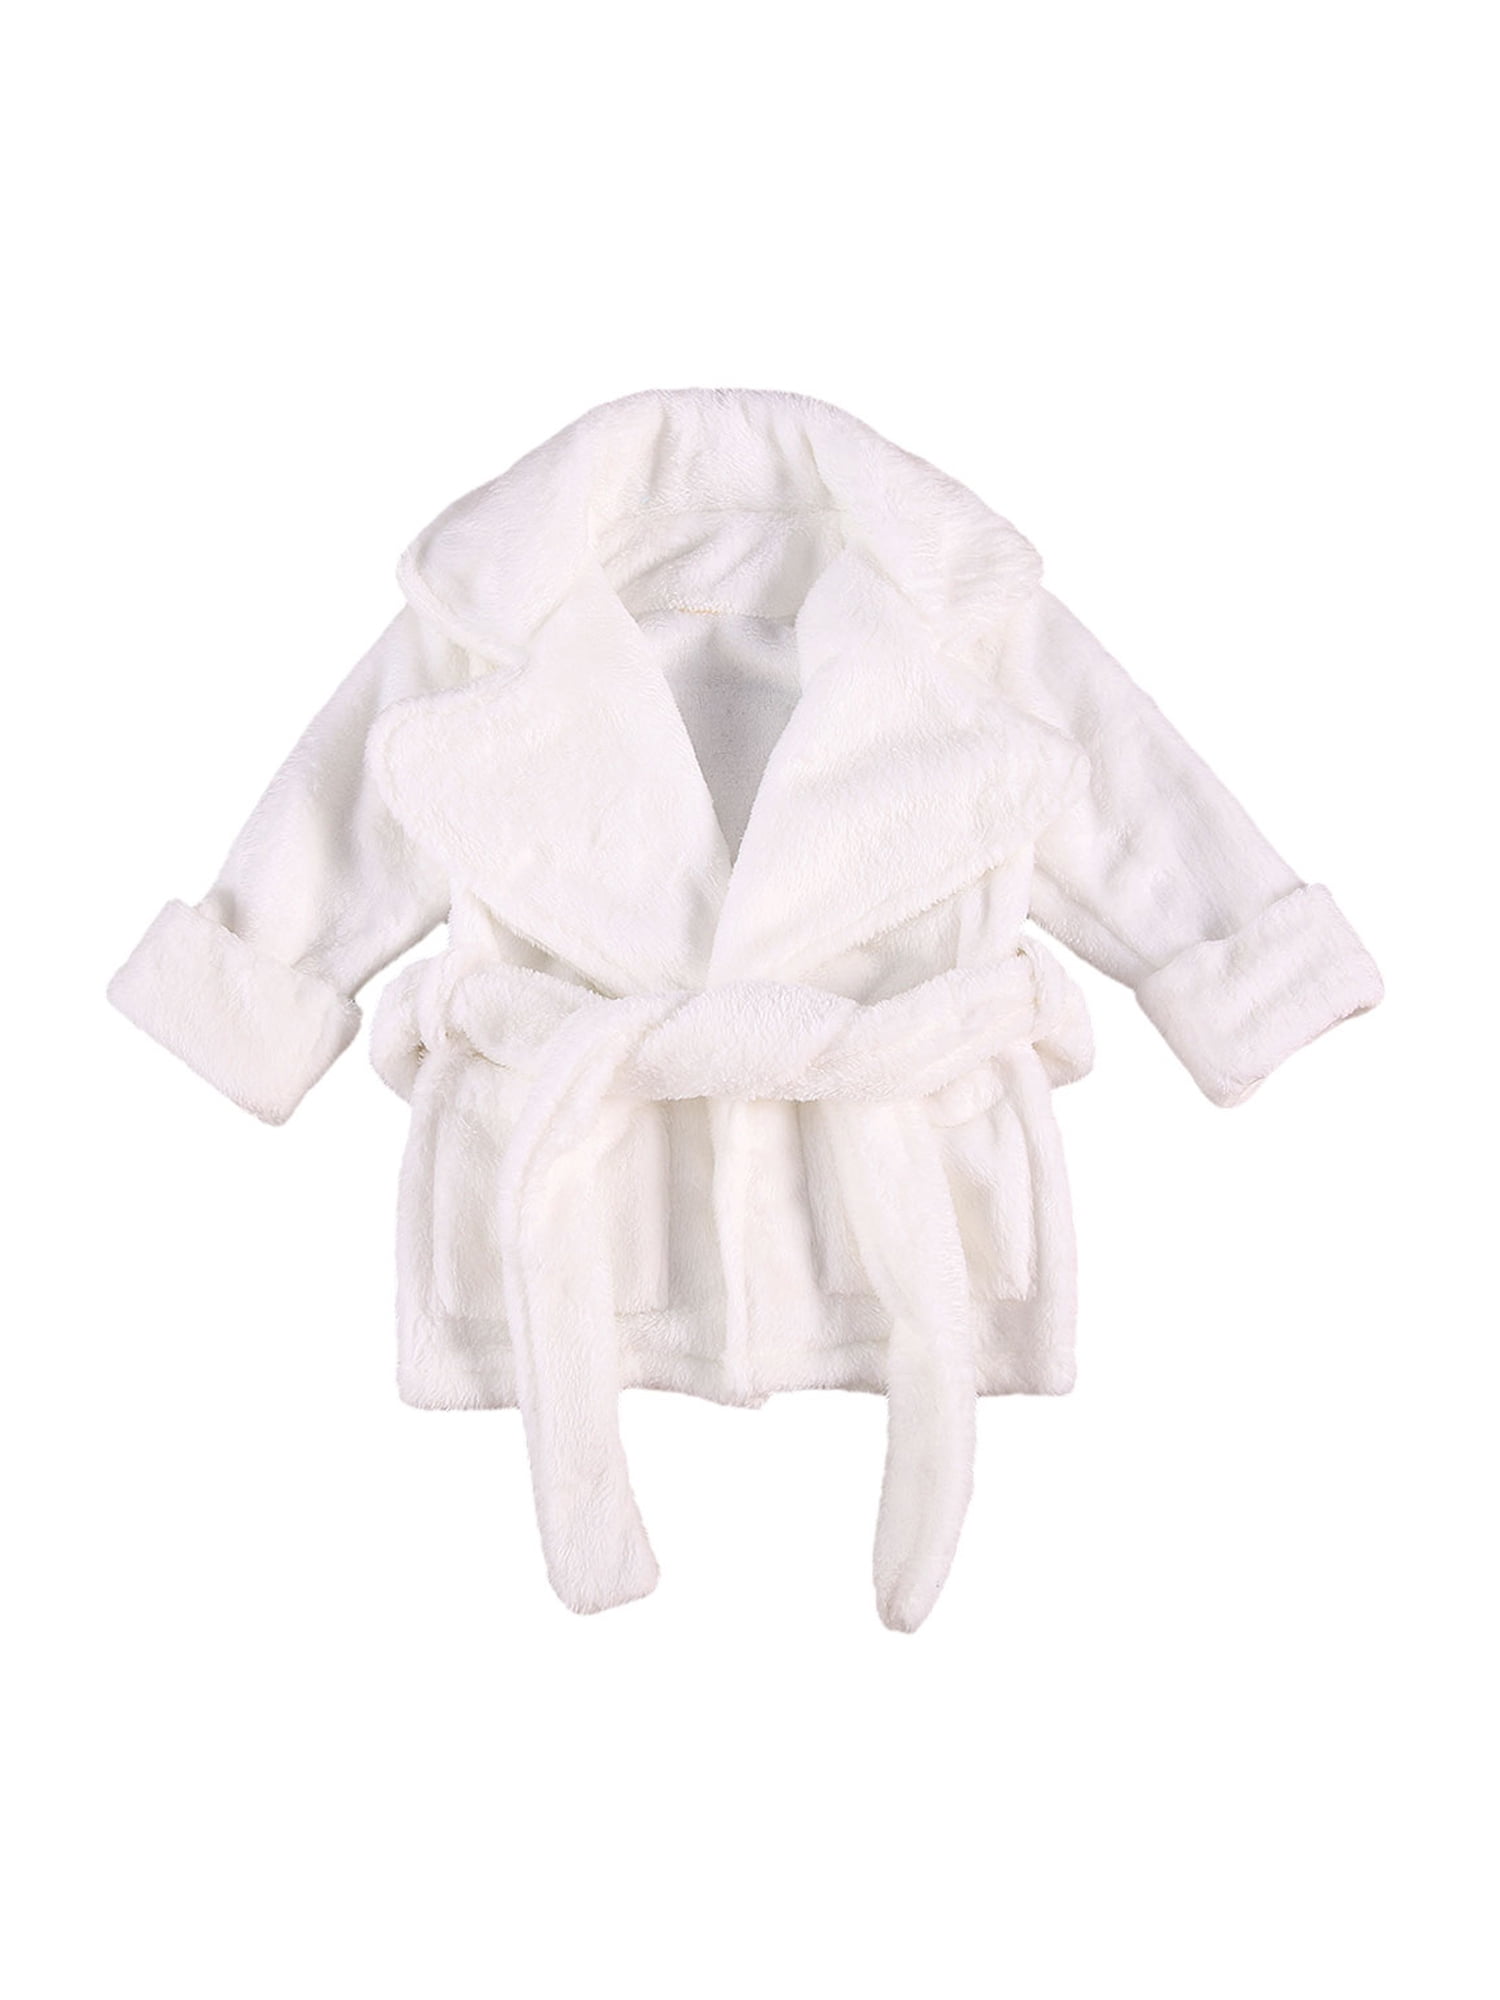 COUTEXYI Baby Boy Girls Flannel Bathrobe Ultra Soft Solid Color Long Sleeve  Lapel Design Robe with Belt and Pocket 